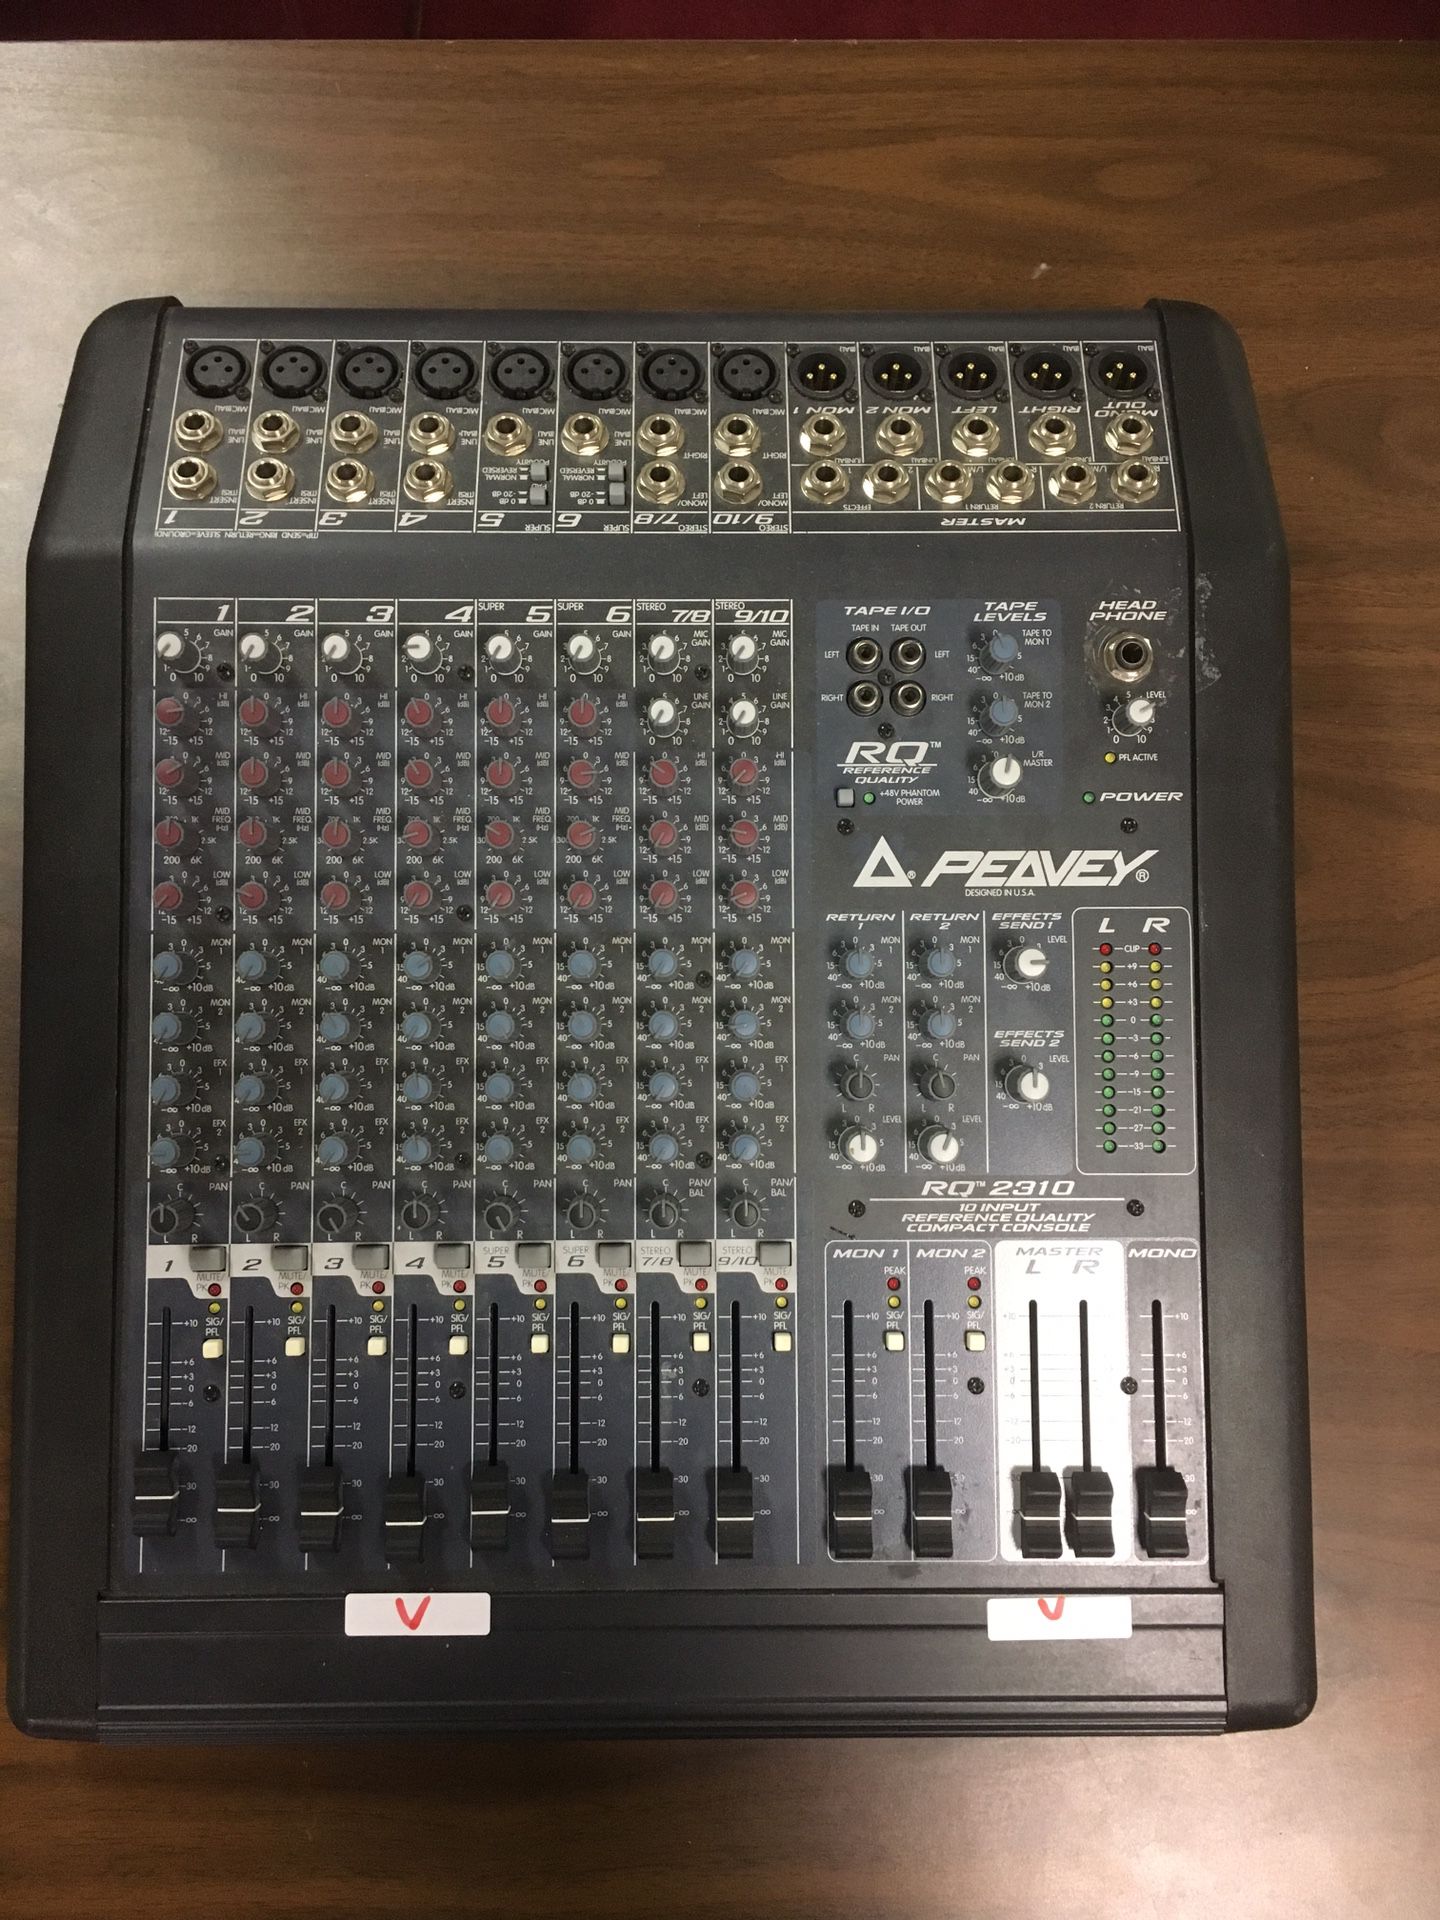 PEAVEY RQ 2310 10 INPUT COMPACT CONSOLE 10 CHANNEL MIXER